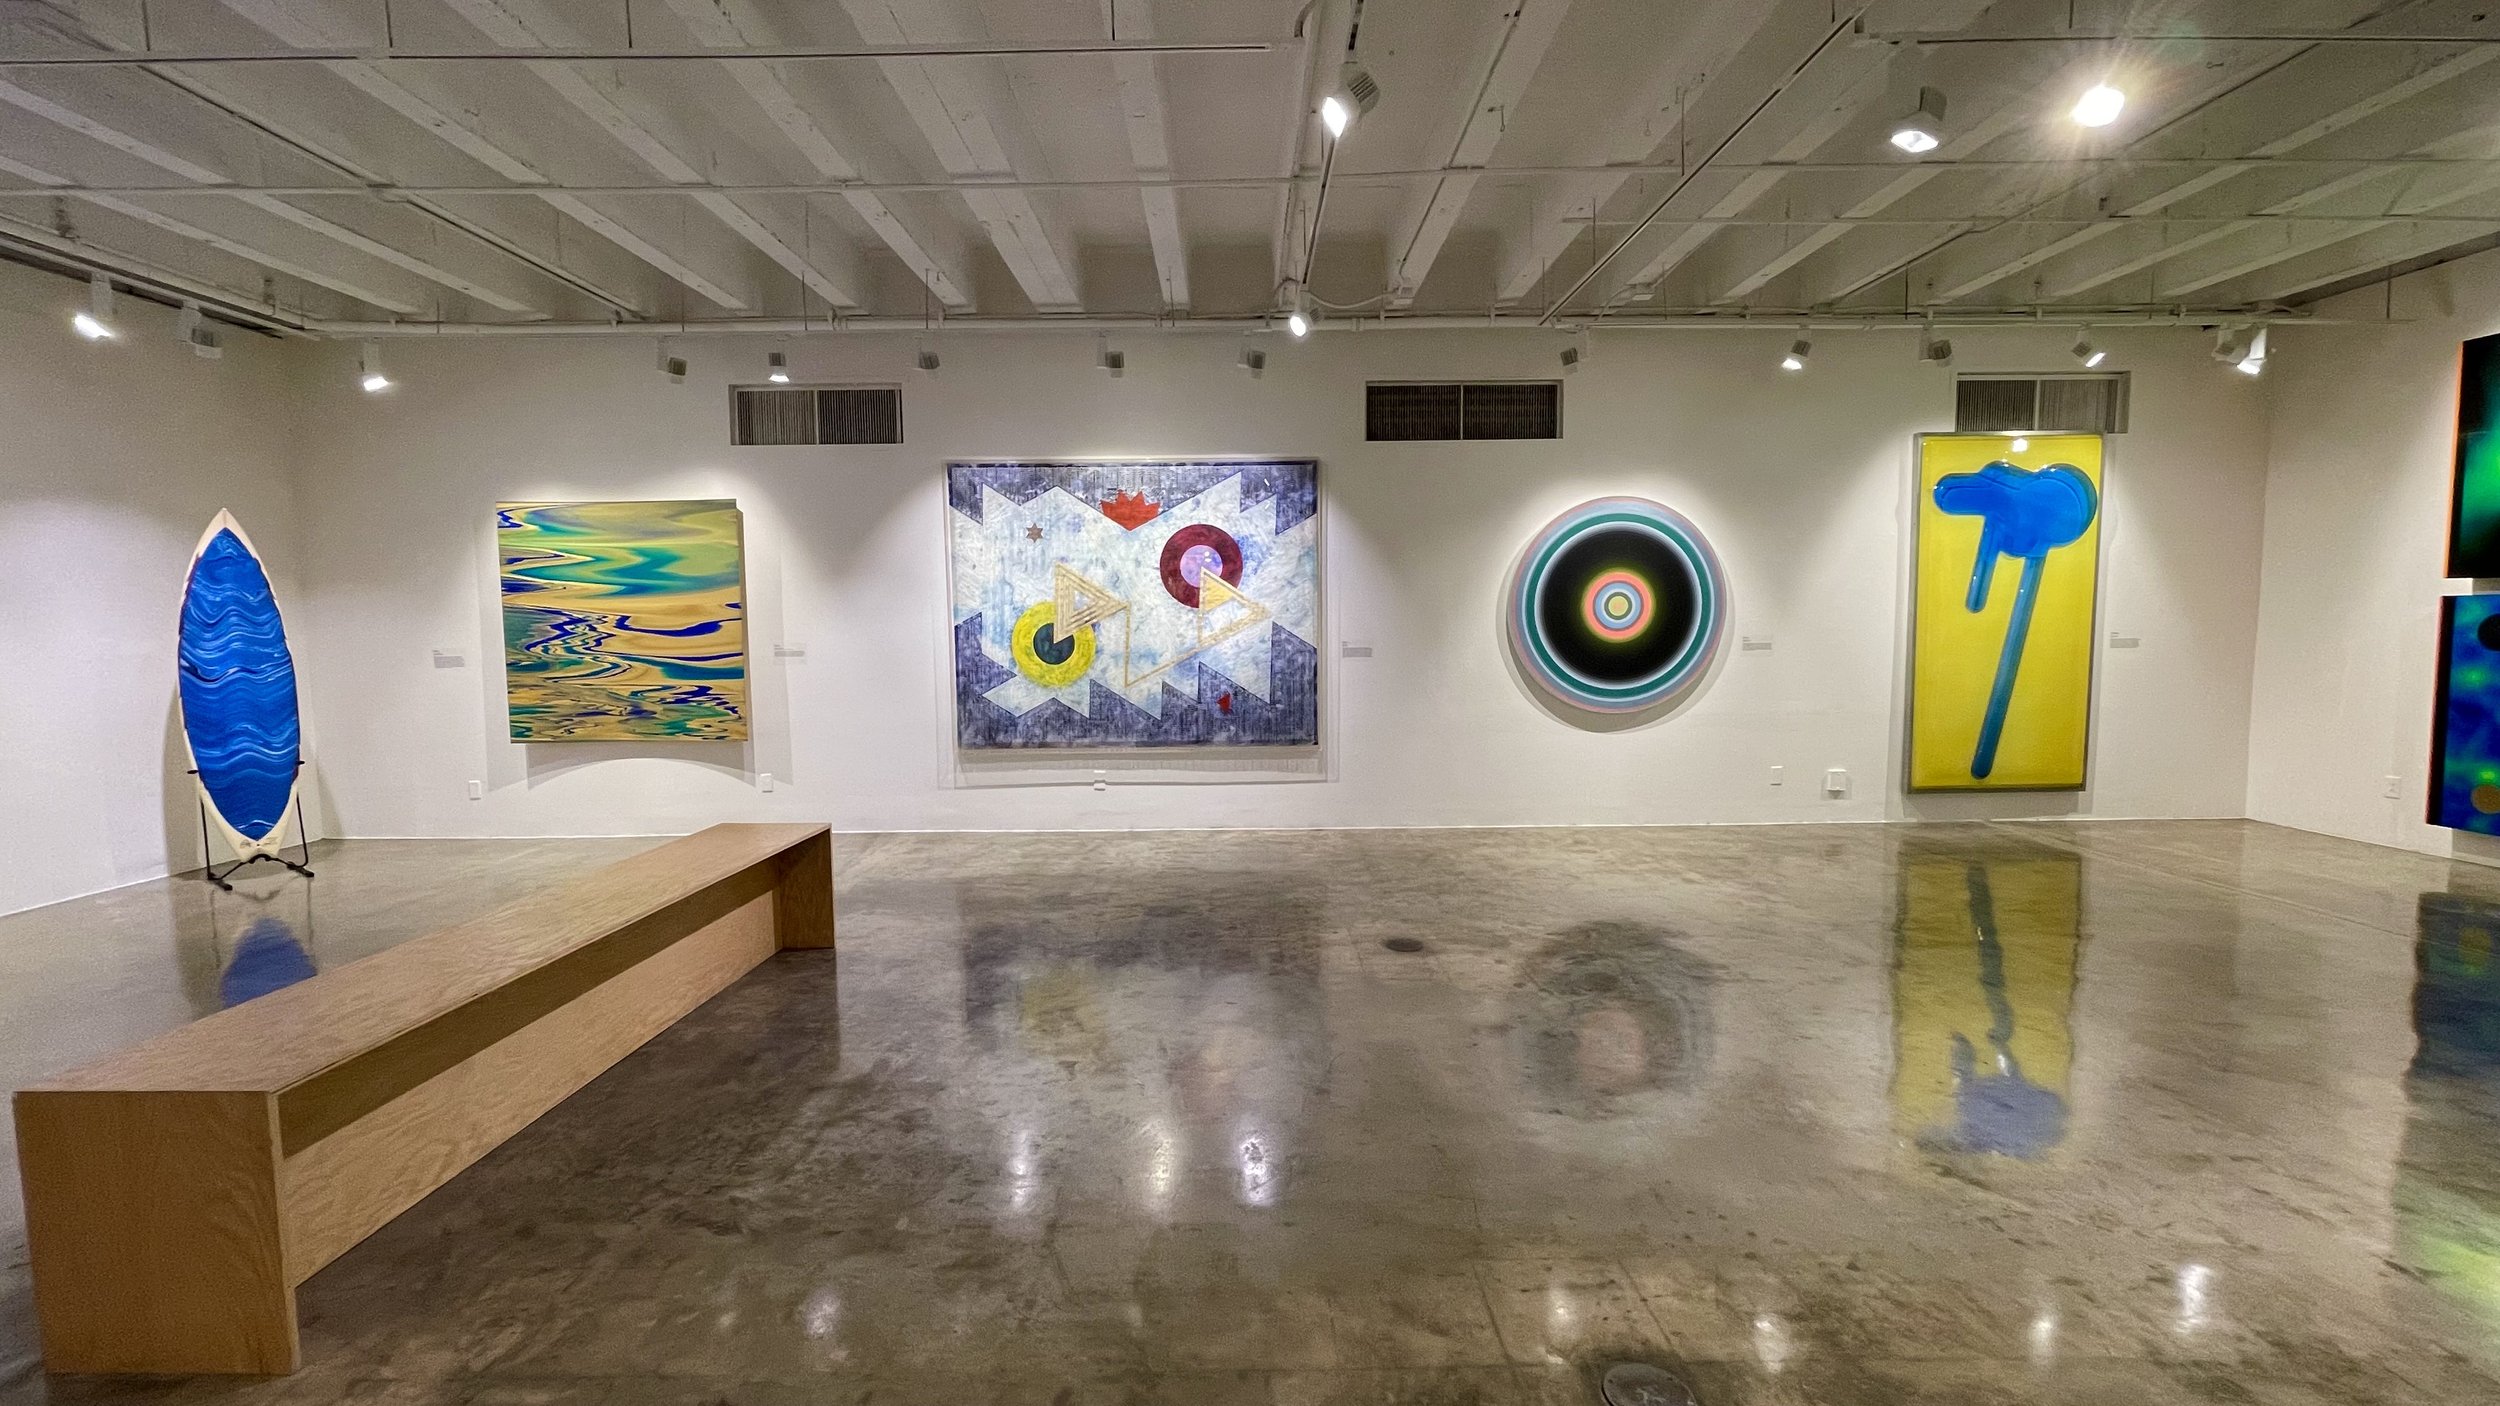  Andy Moses,  Morphology H20  (2013); Andy Moses,  Morphology  (2014); Tom Wudl,  Untitled  (1973); Gary Lang,  BLUELIGHTEIGHT  (2015); Craig Kauffman,  Yellow-Blue  (1965) 